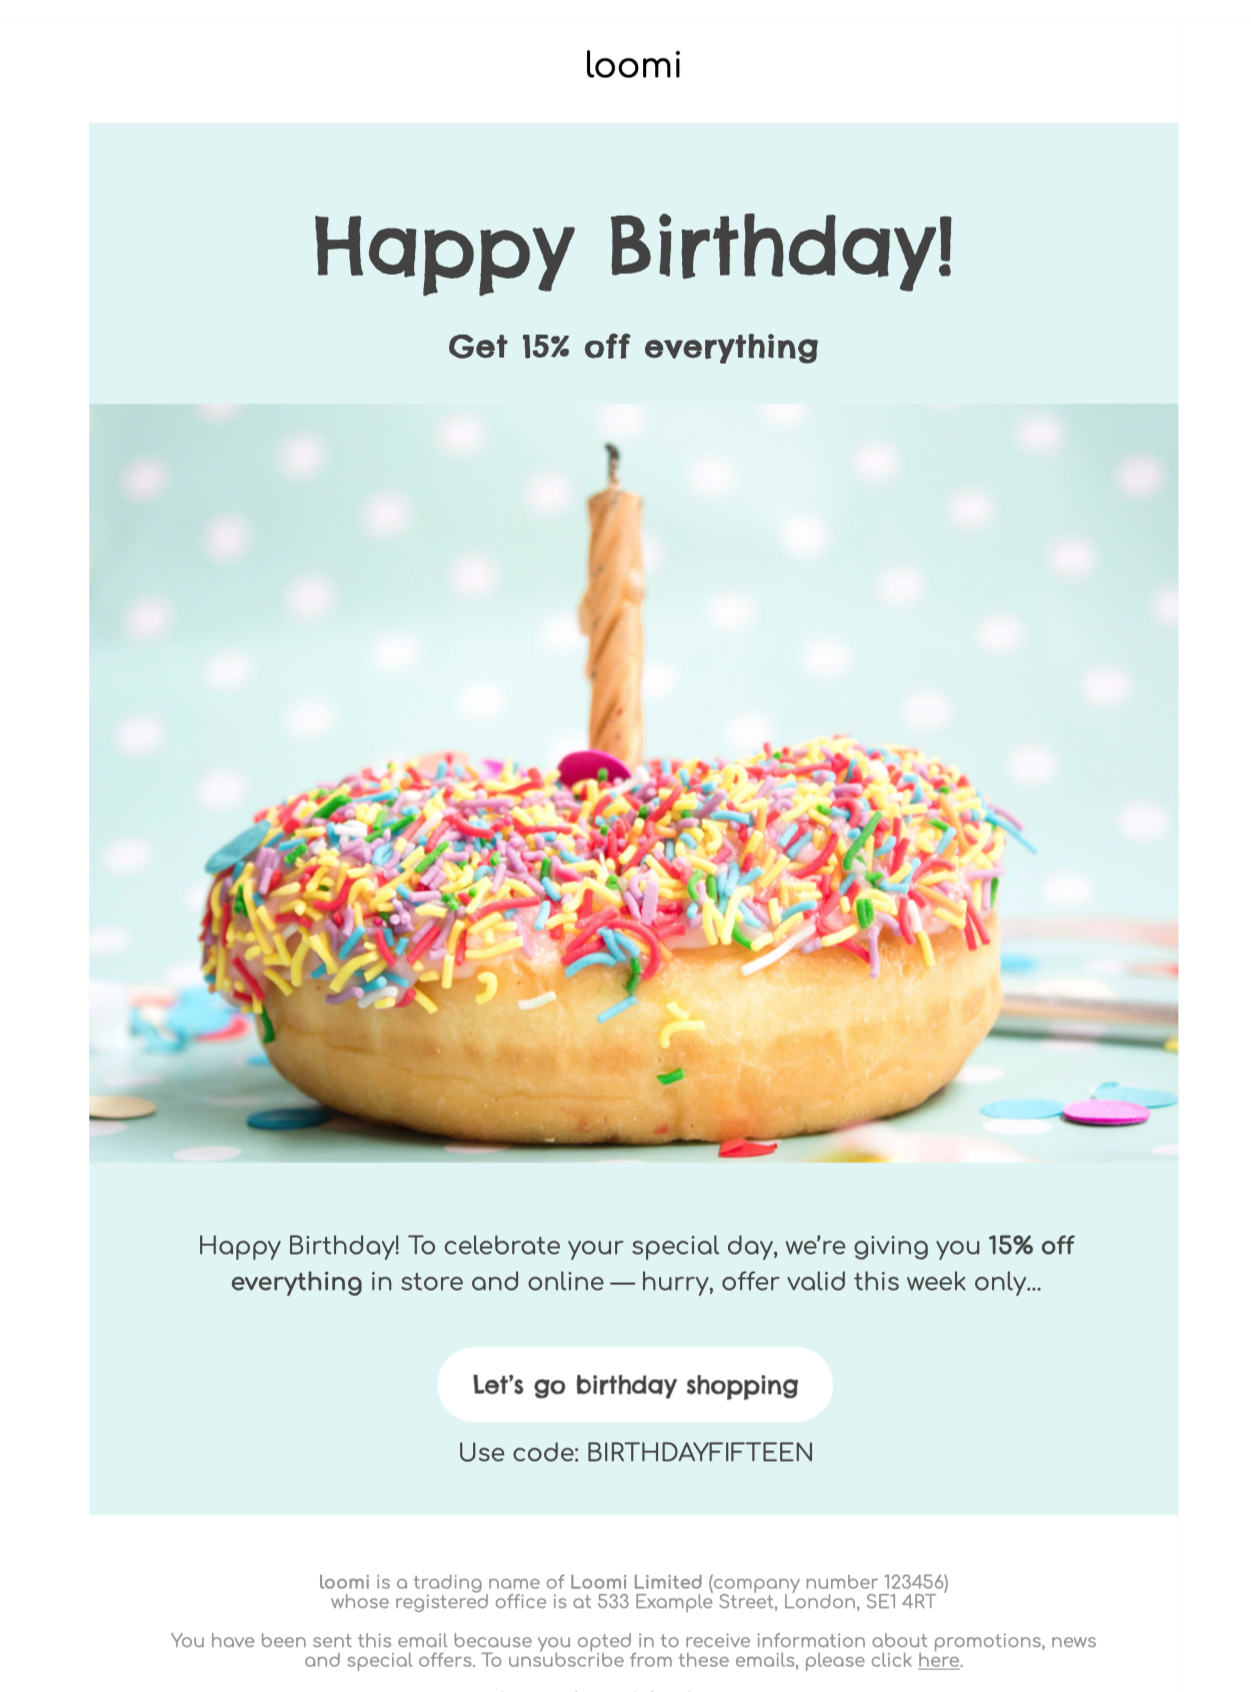 Happy Birthday HTML Email Template Mail Designer Create HTML email